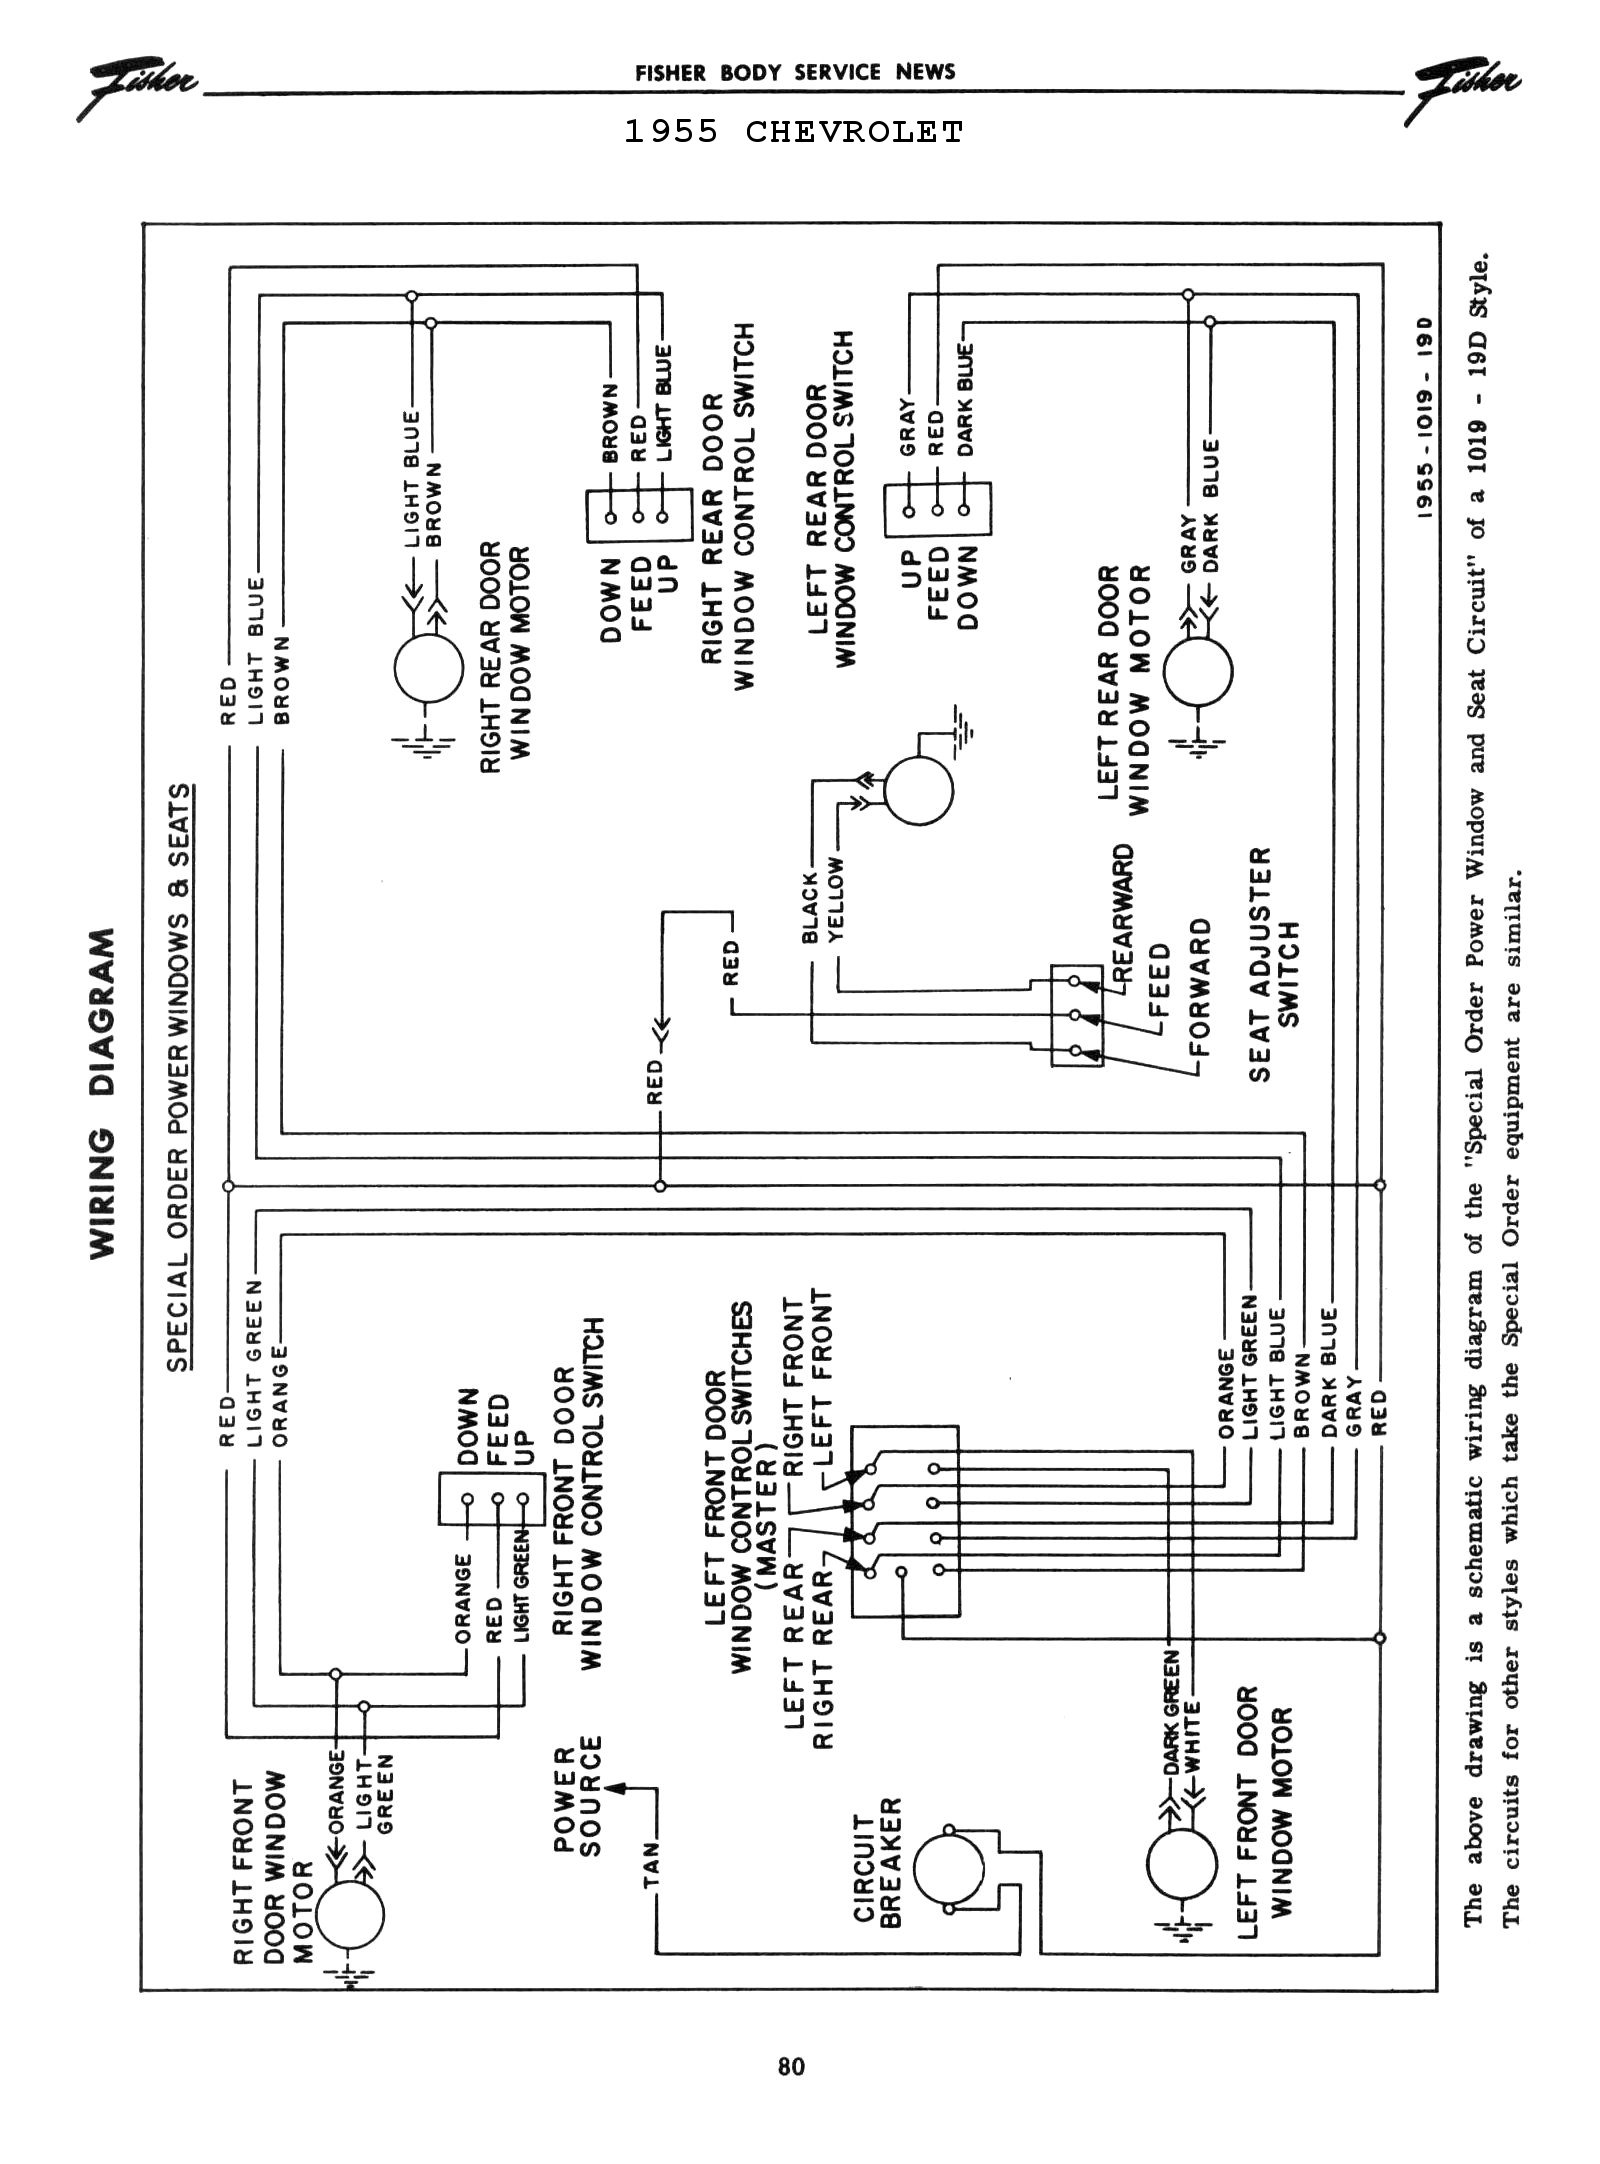 56 Chevrolet Power Window Wiring Diagram from chevy.oldcarmanualproject.com